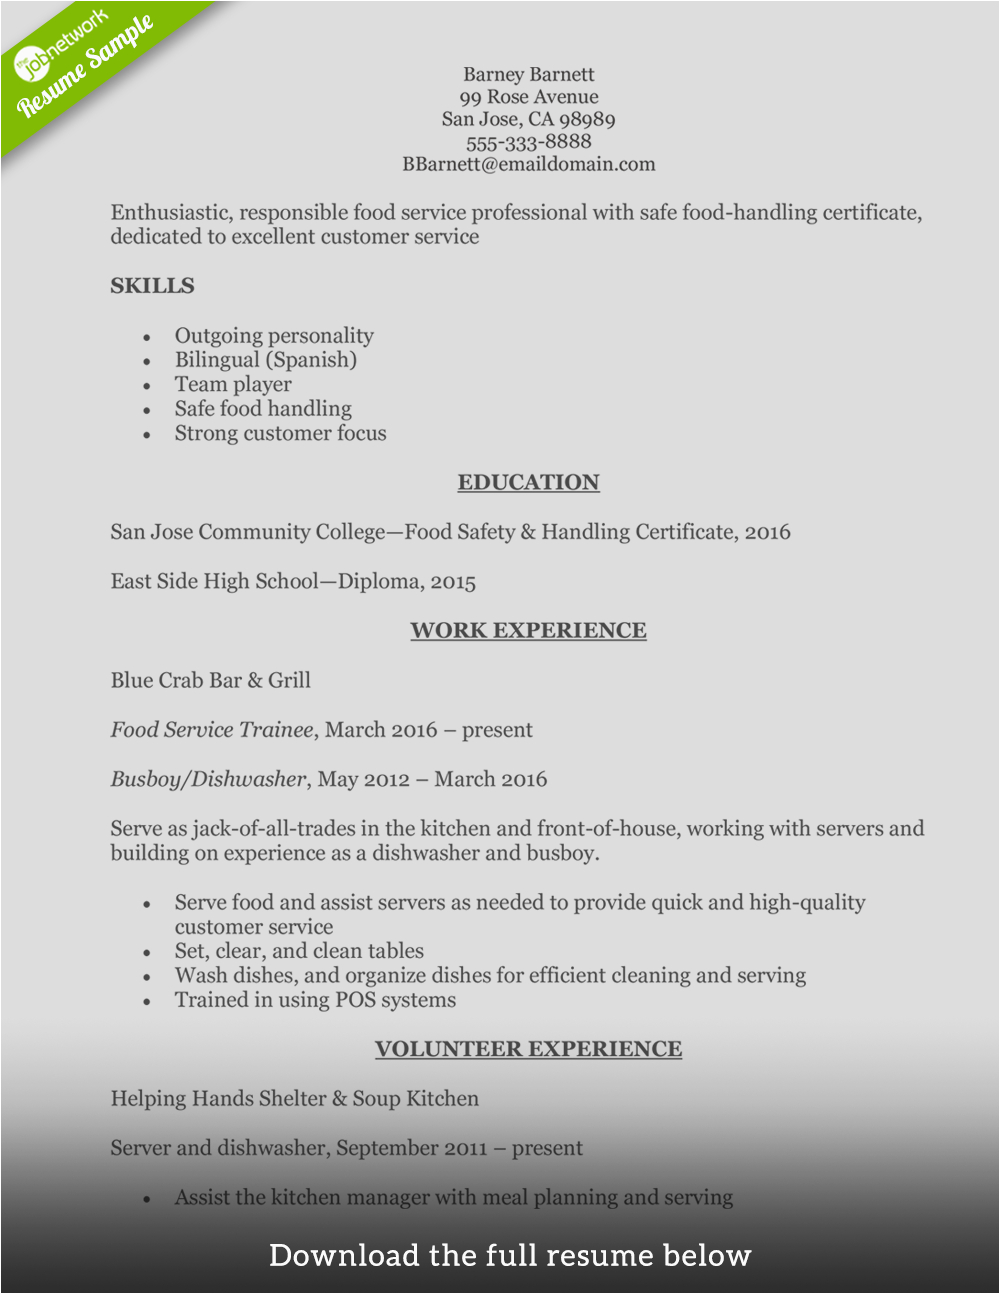 Entry Level Food Service Resume Sample How to Write A Perfect Food Service Resume Examples Included